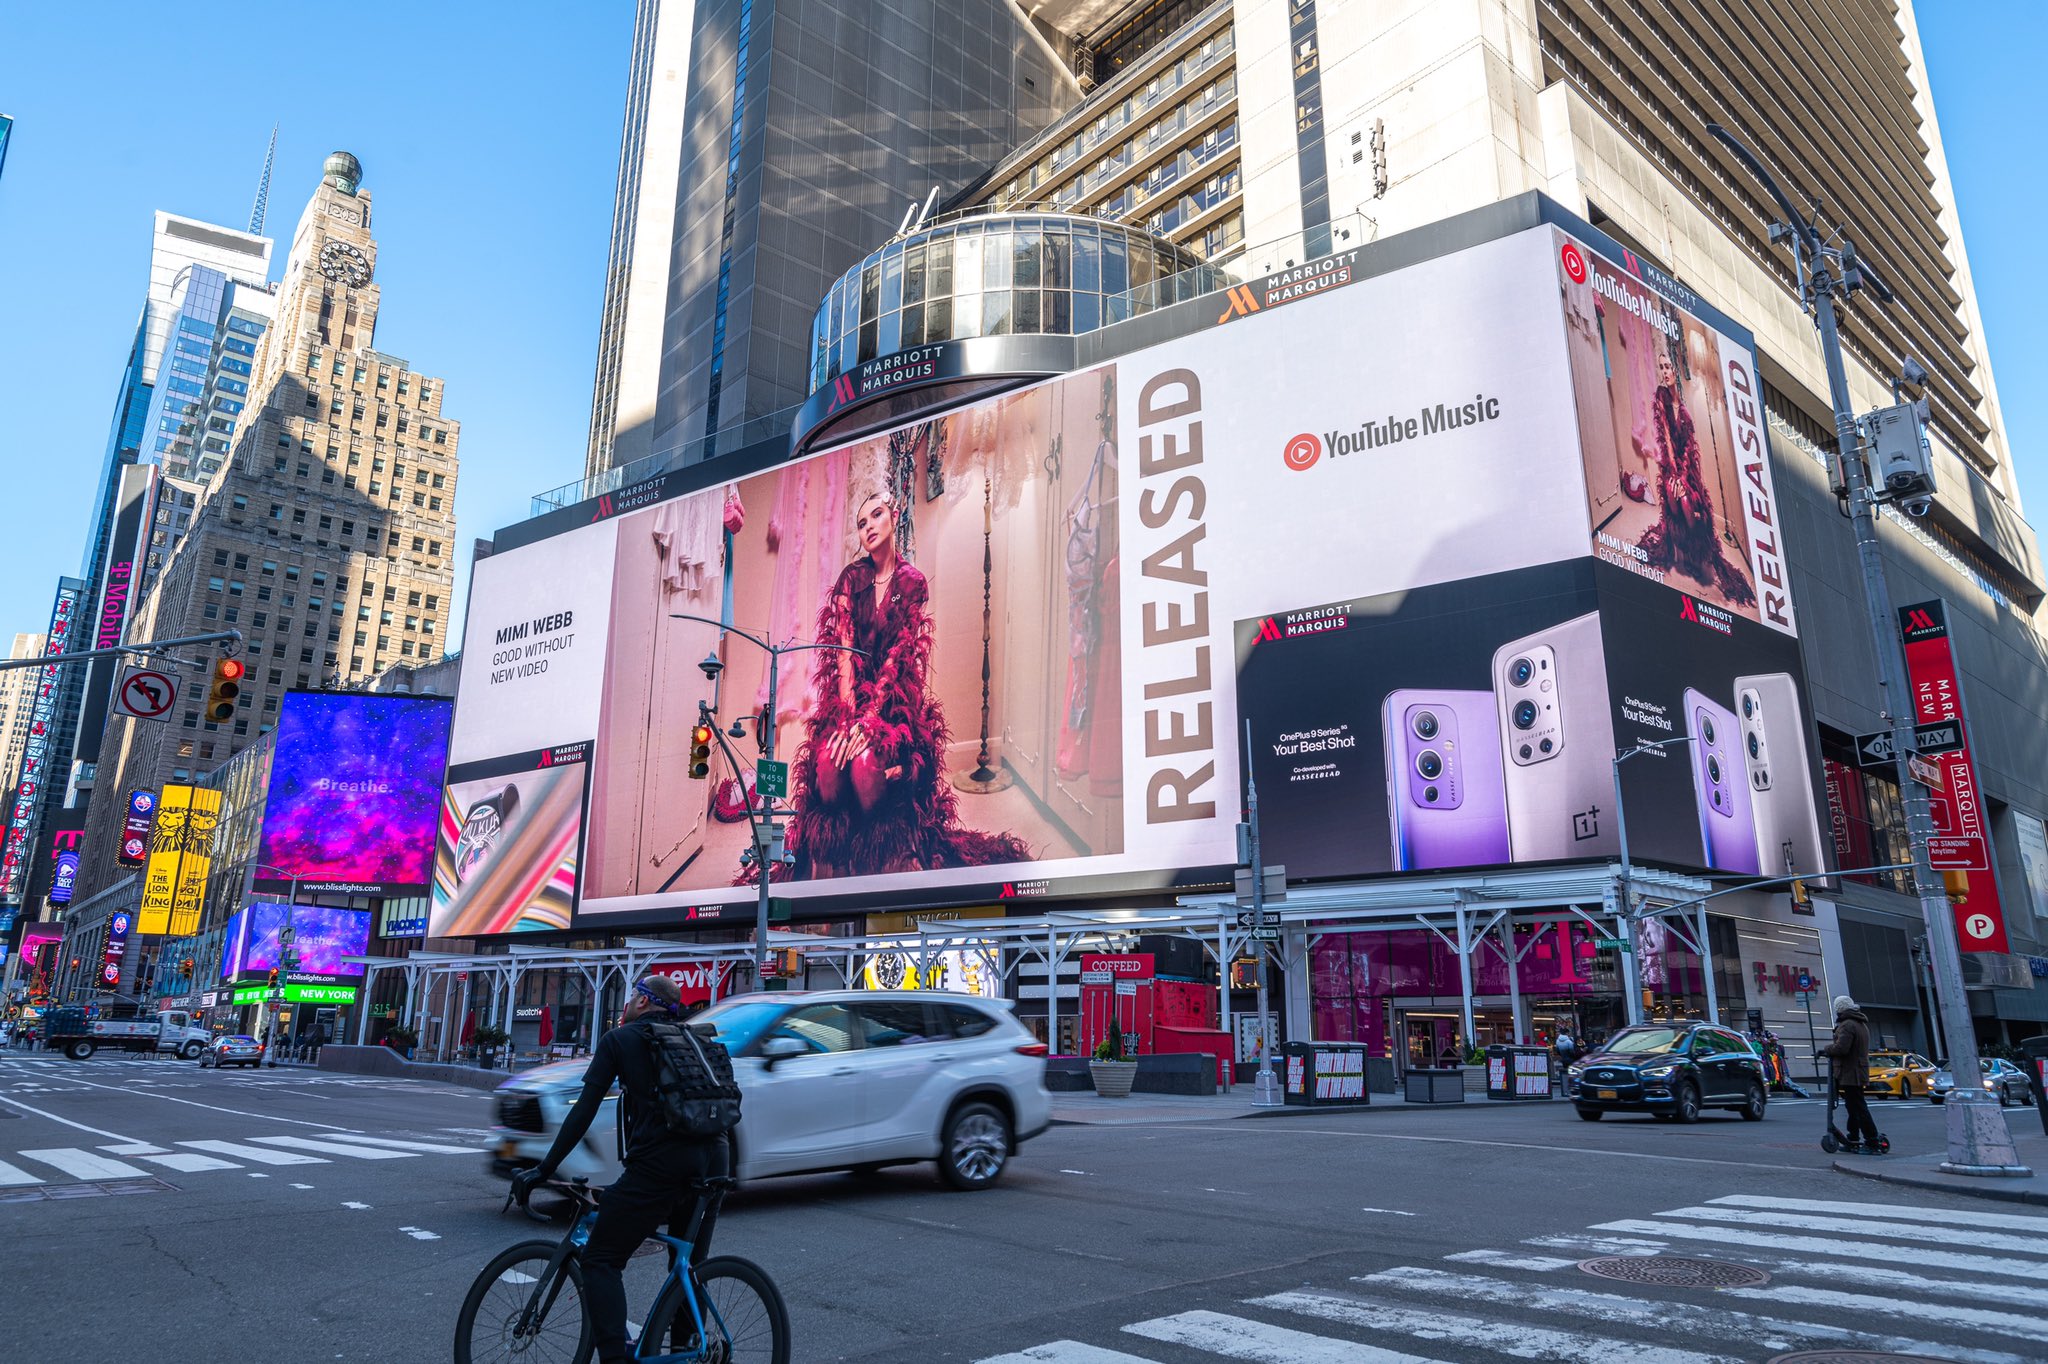 Nike x Louis Vuitton billboard in Times Square NYC ✨